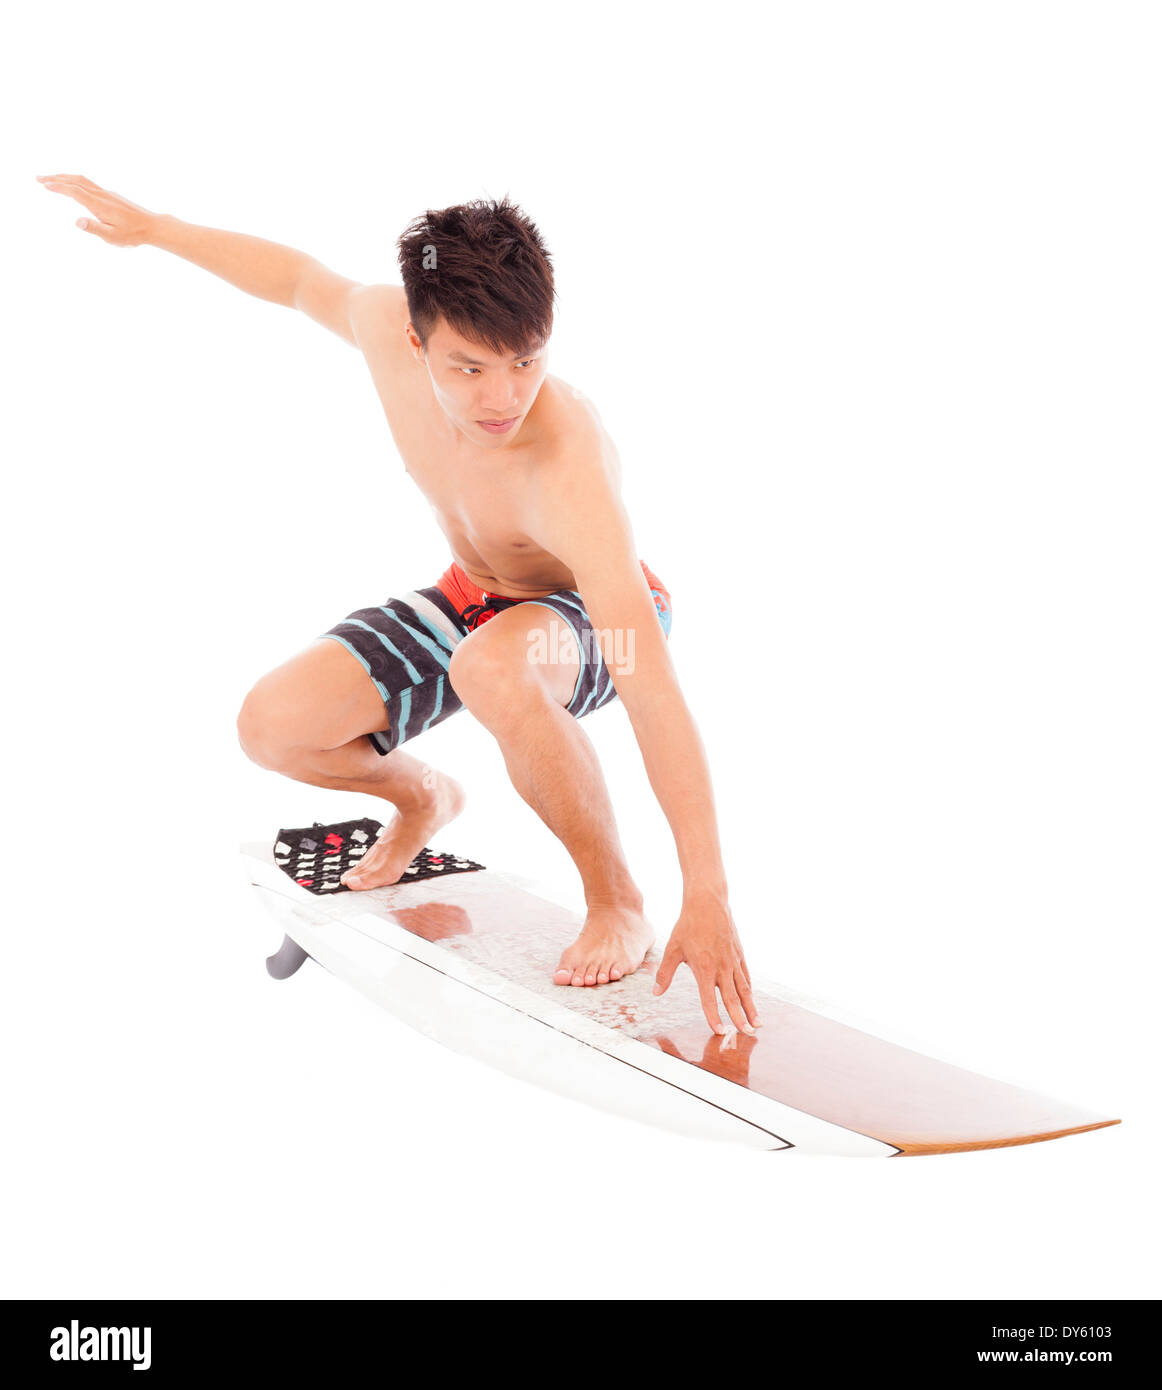 young surfer practice surfing pose Stock Photo